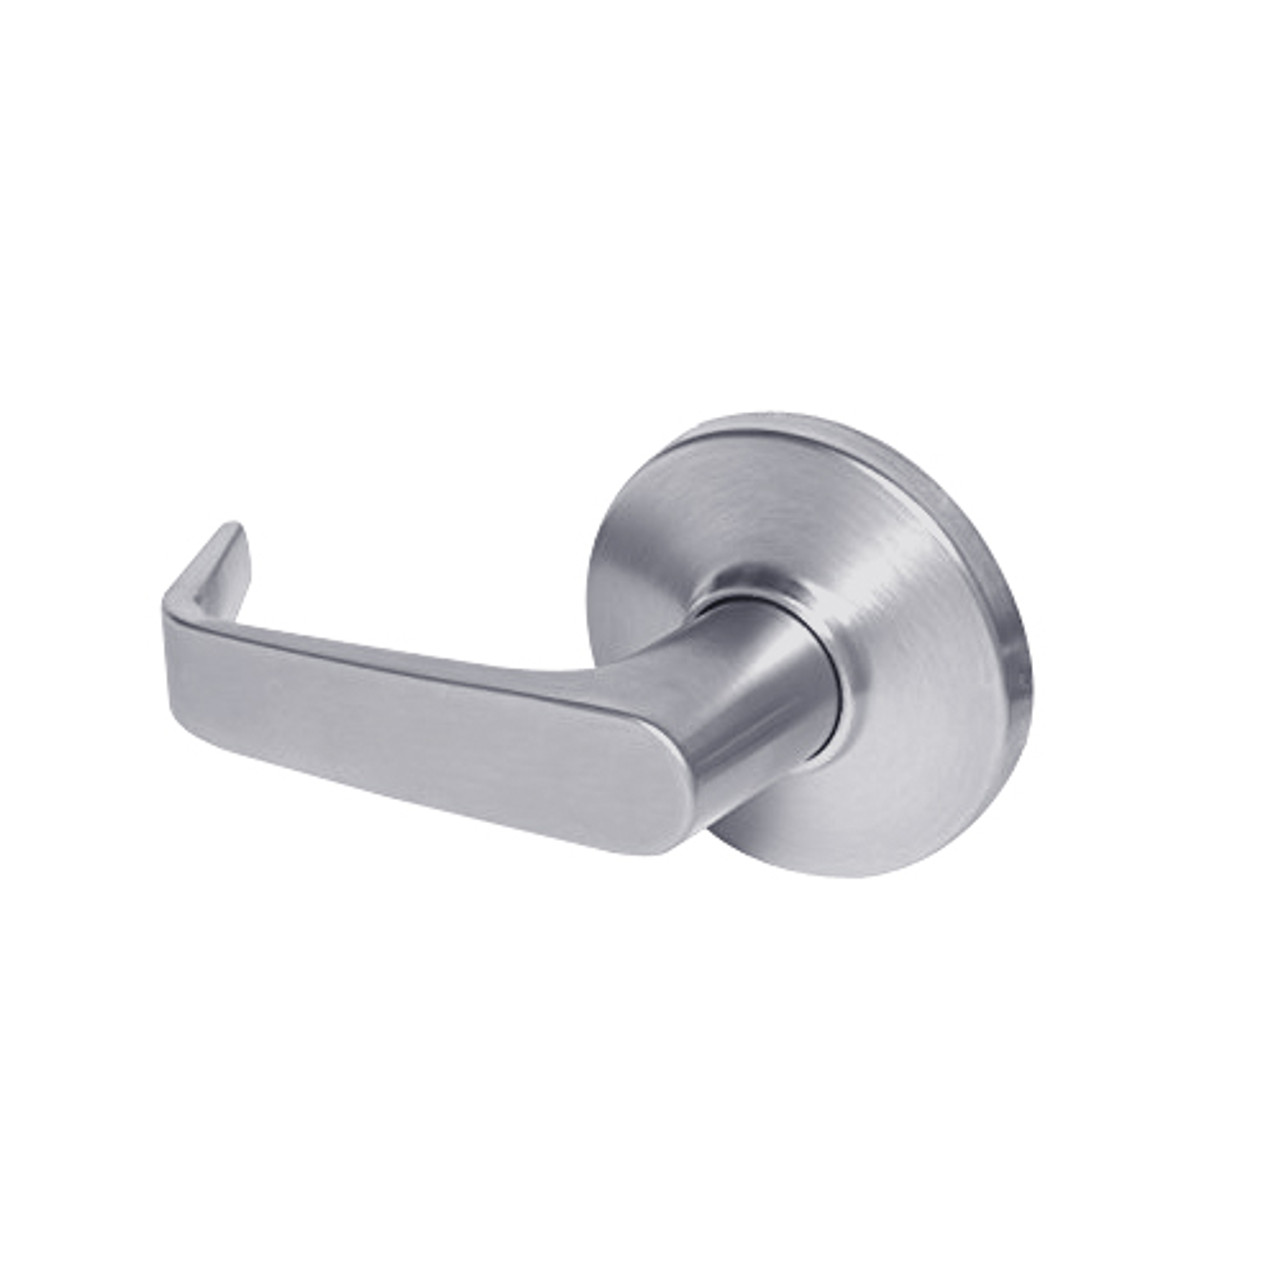 9K30Y15DSTK626 Best 9K Series Exit Heavy Duty Cylindrical Lever Locks with Contour Angle with Return Lever Design in Satin Chrome